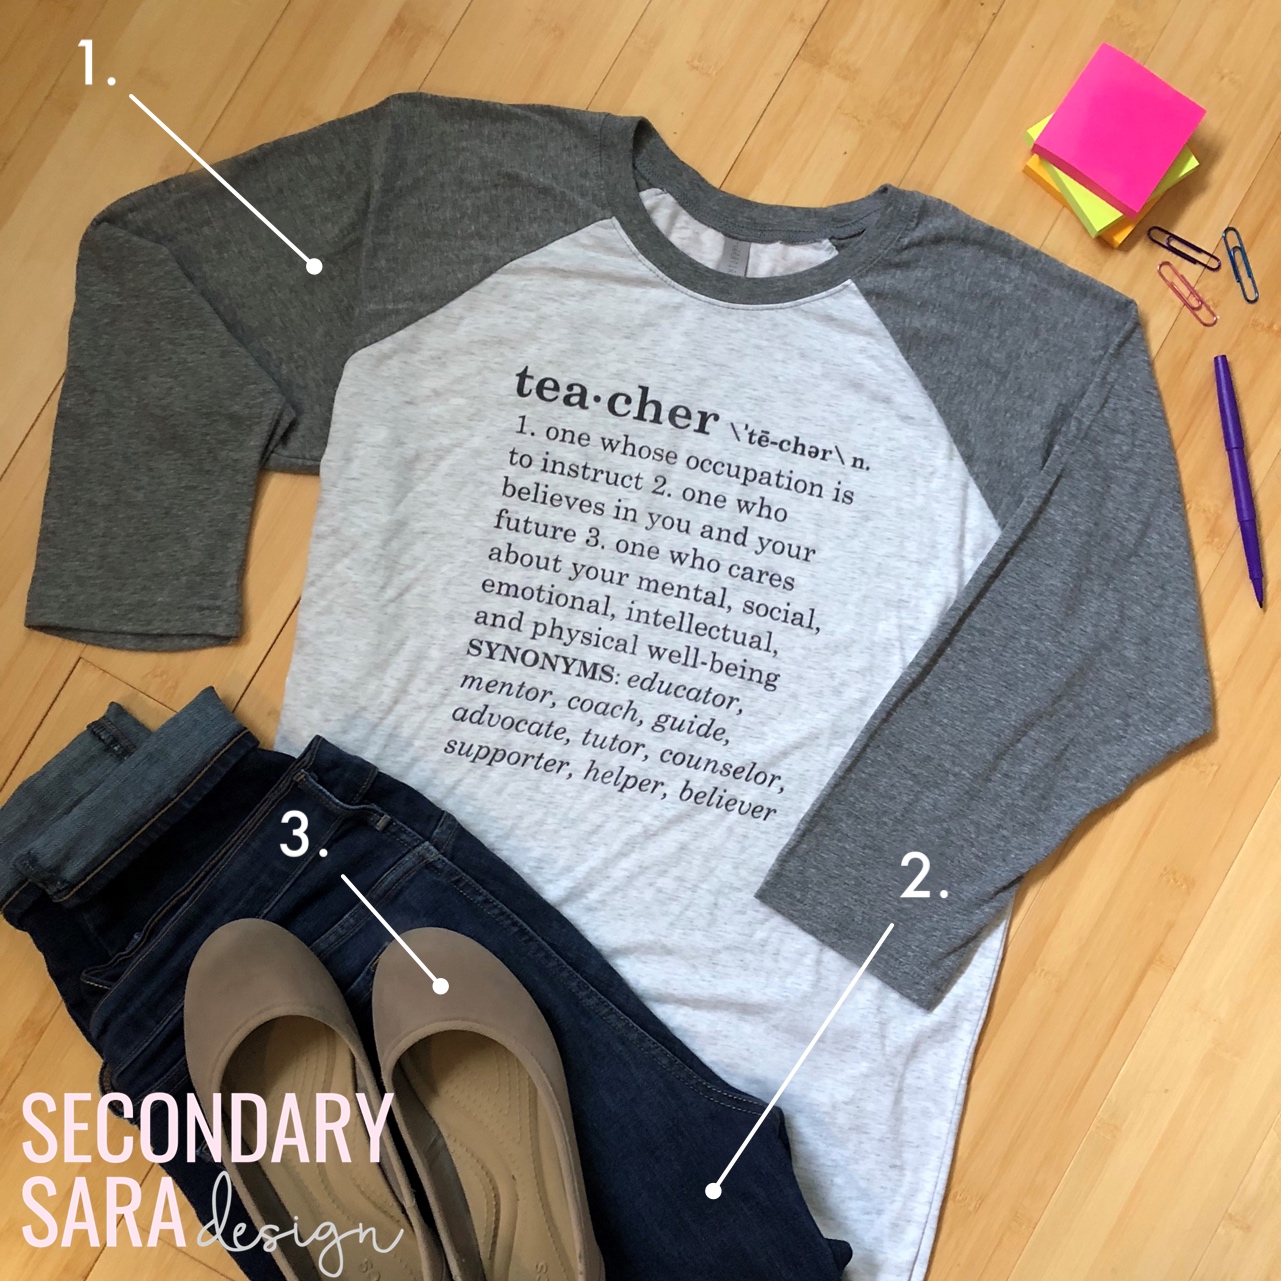 9 Literary Outfits For English Teachers Secondary Sara